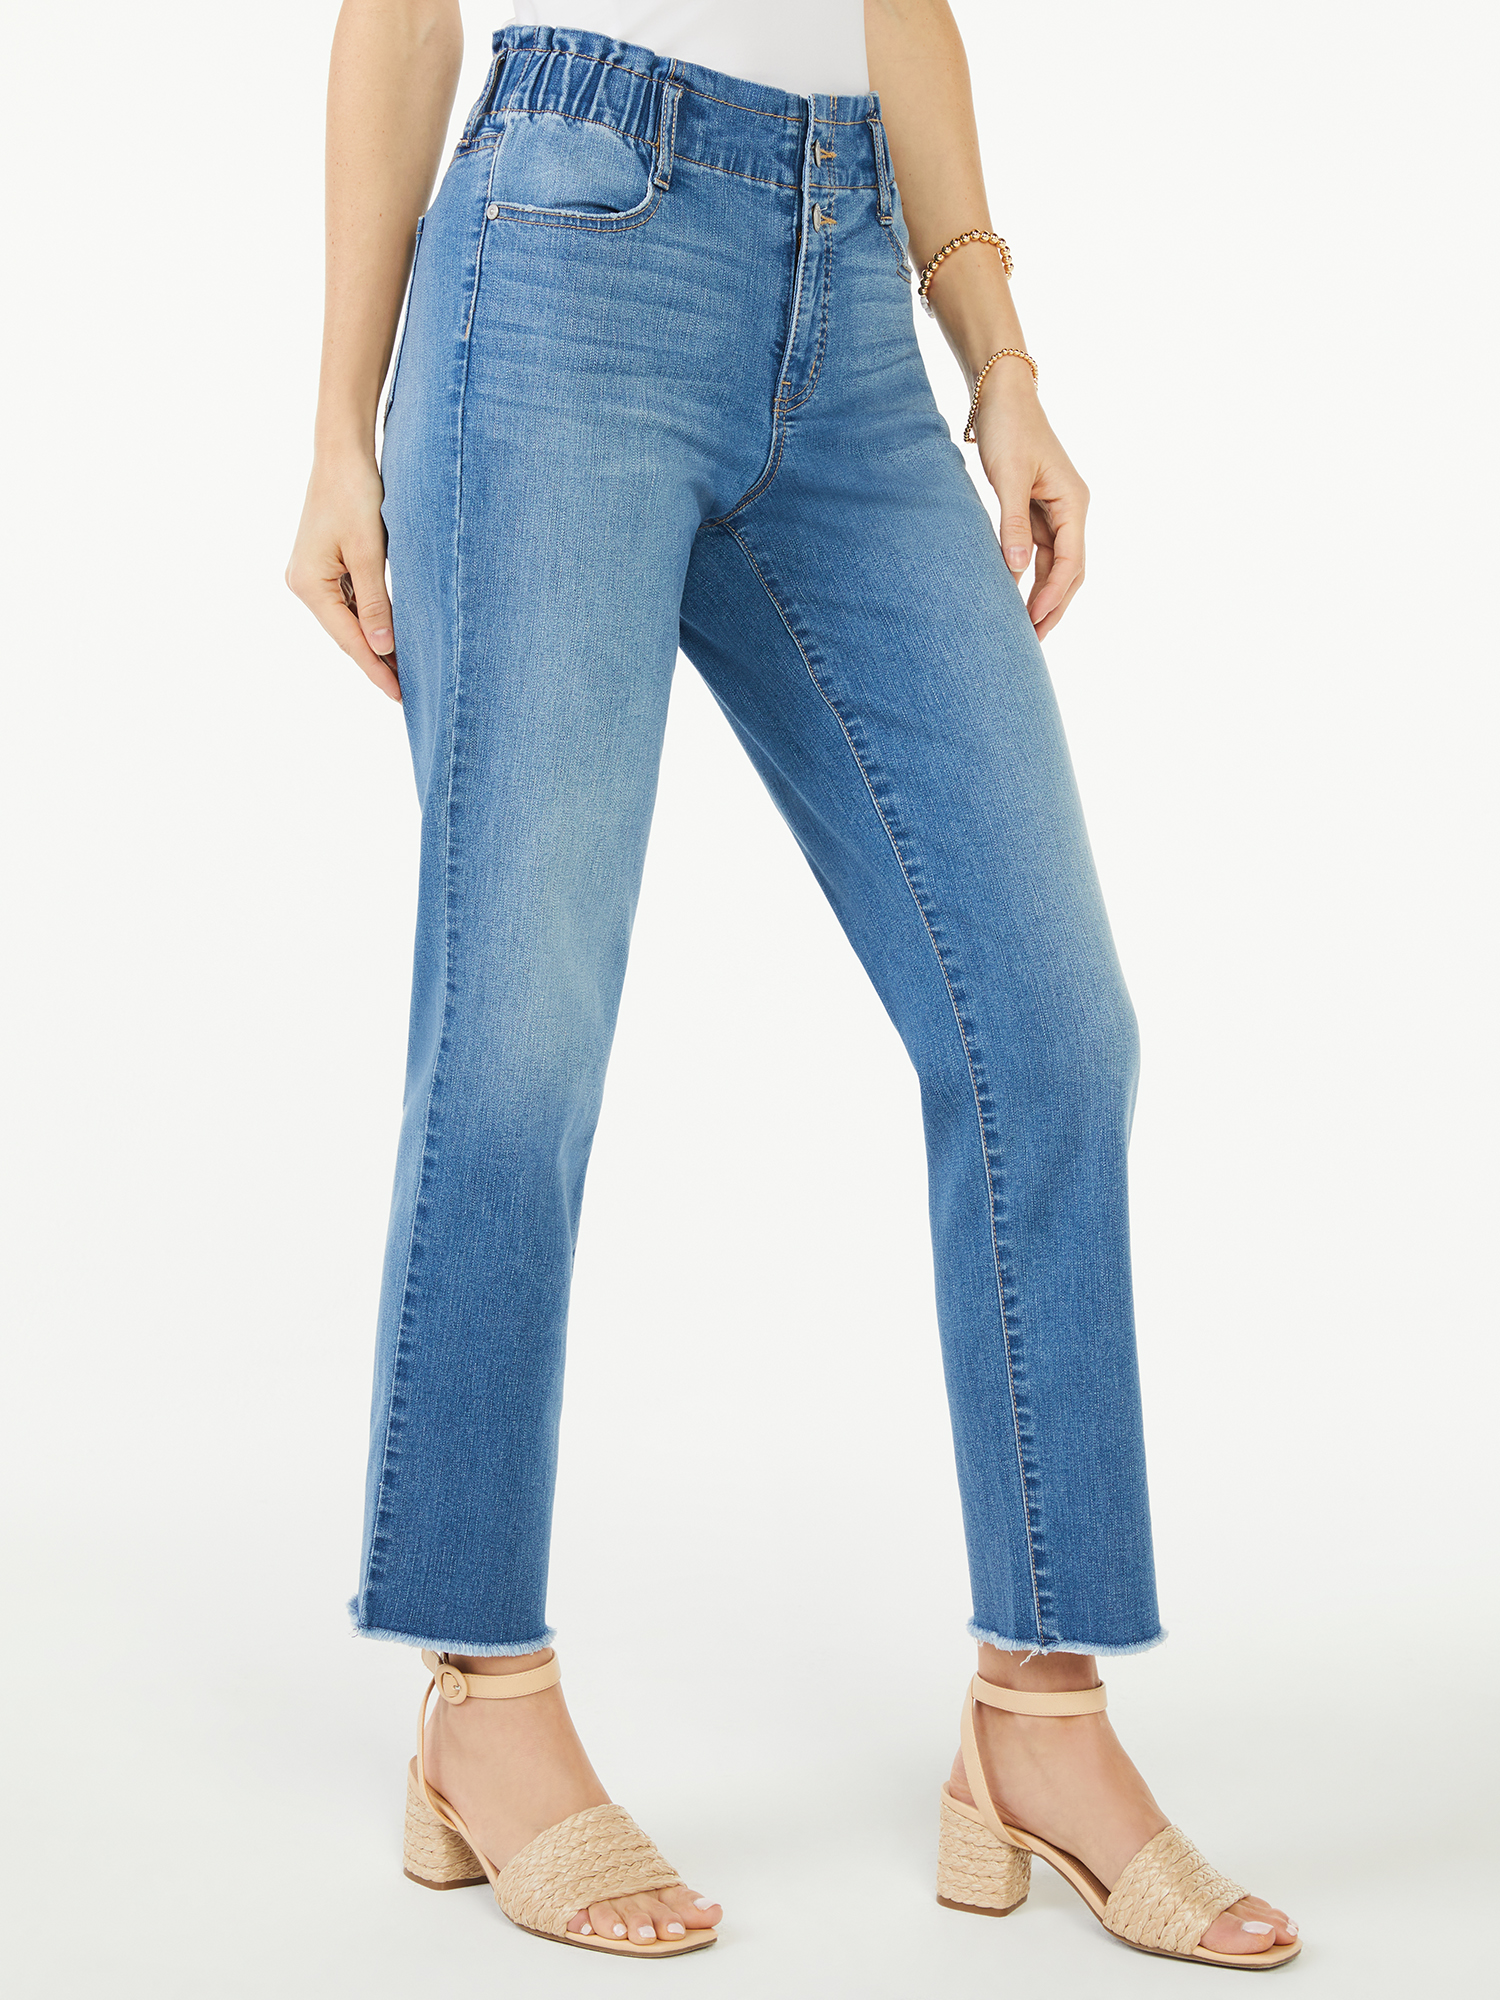 Scoop Women's High-Rise Straight Crop Jeans - image 4 of 6